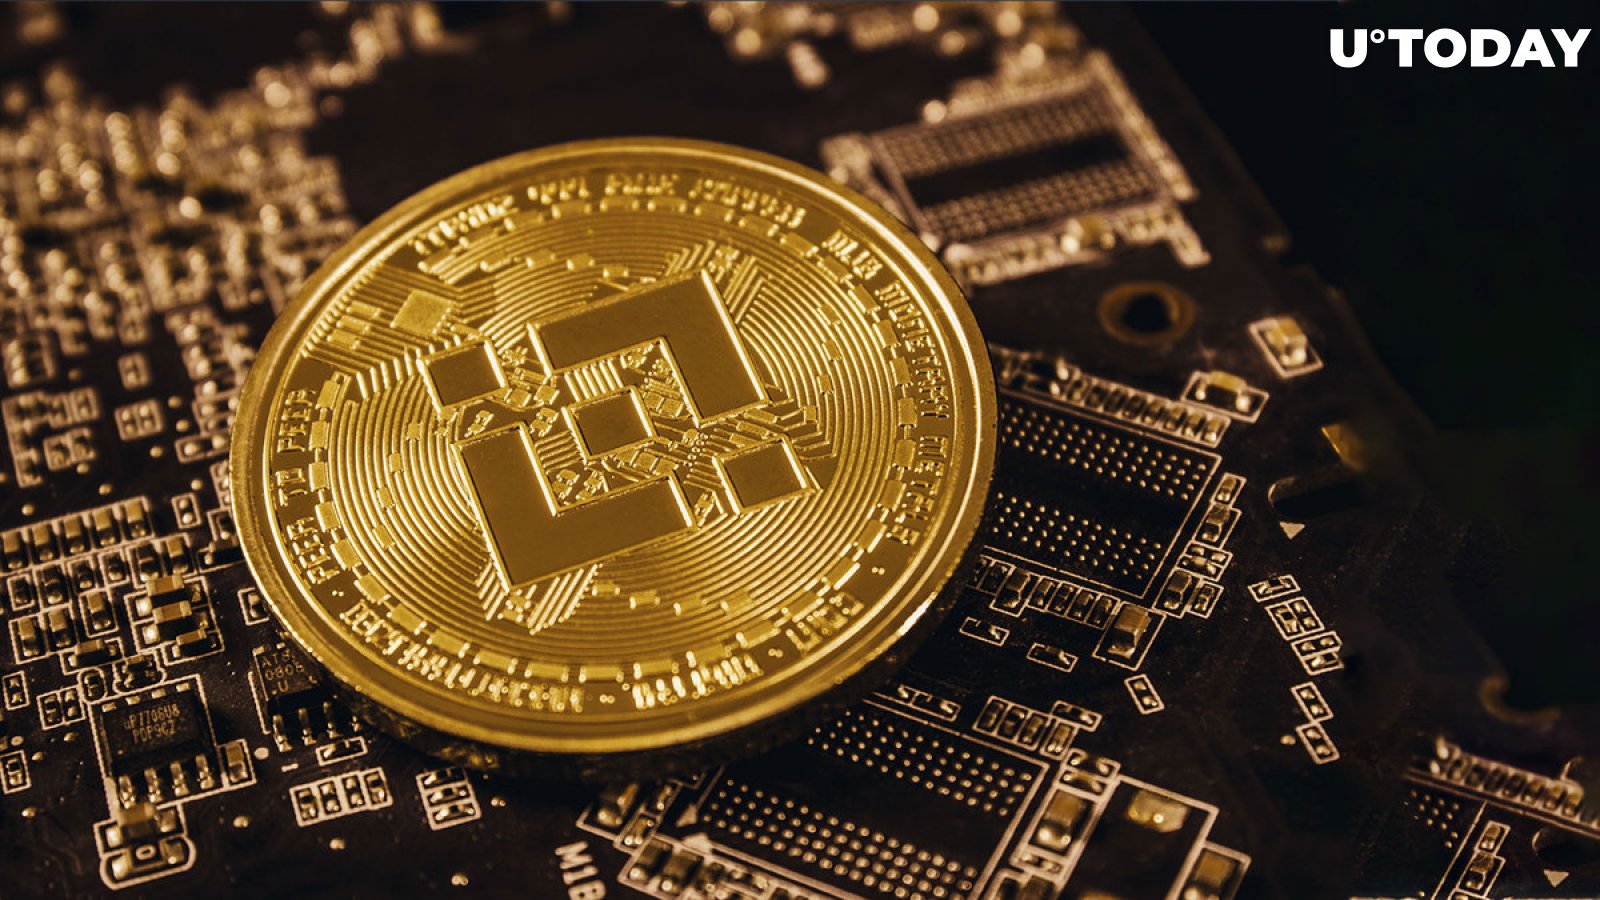 Almost $1 Billion out of Binance in 24 Hours: Here's Main Beneficiary